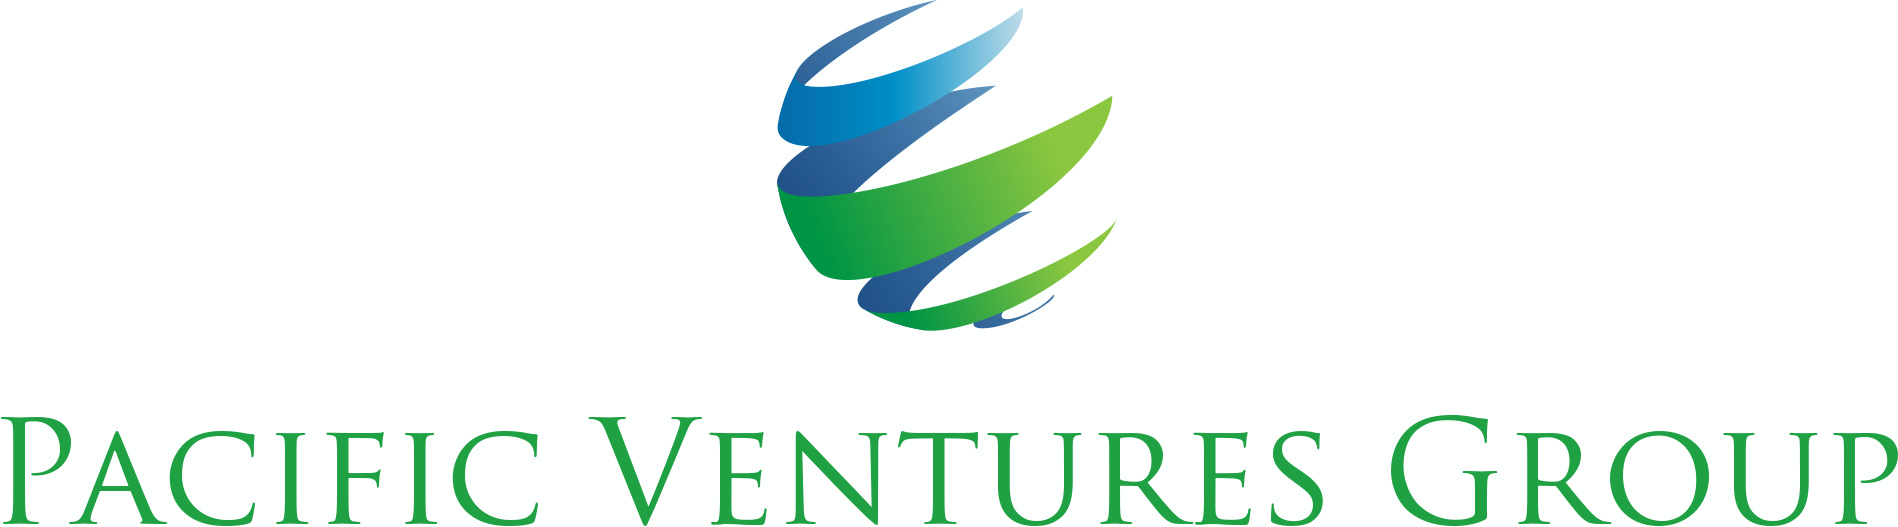 Pacific Ventures Group, Inc., Monday, July 6, 2020, Press release picture